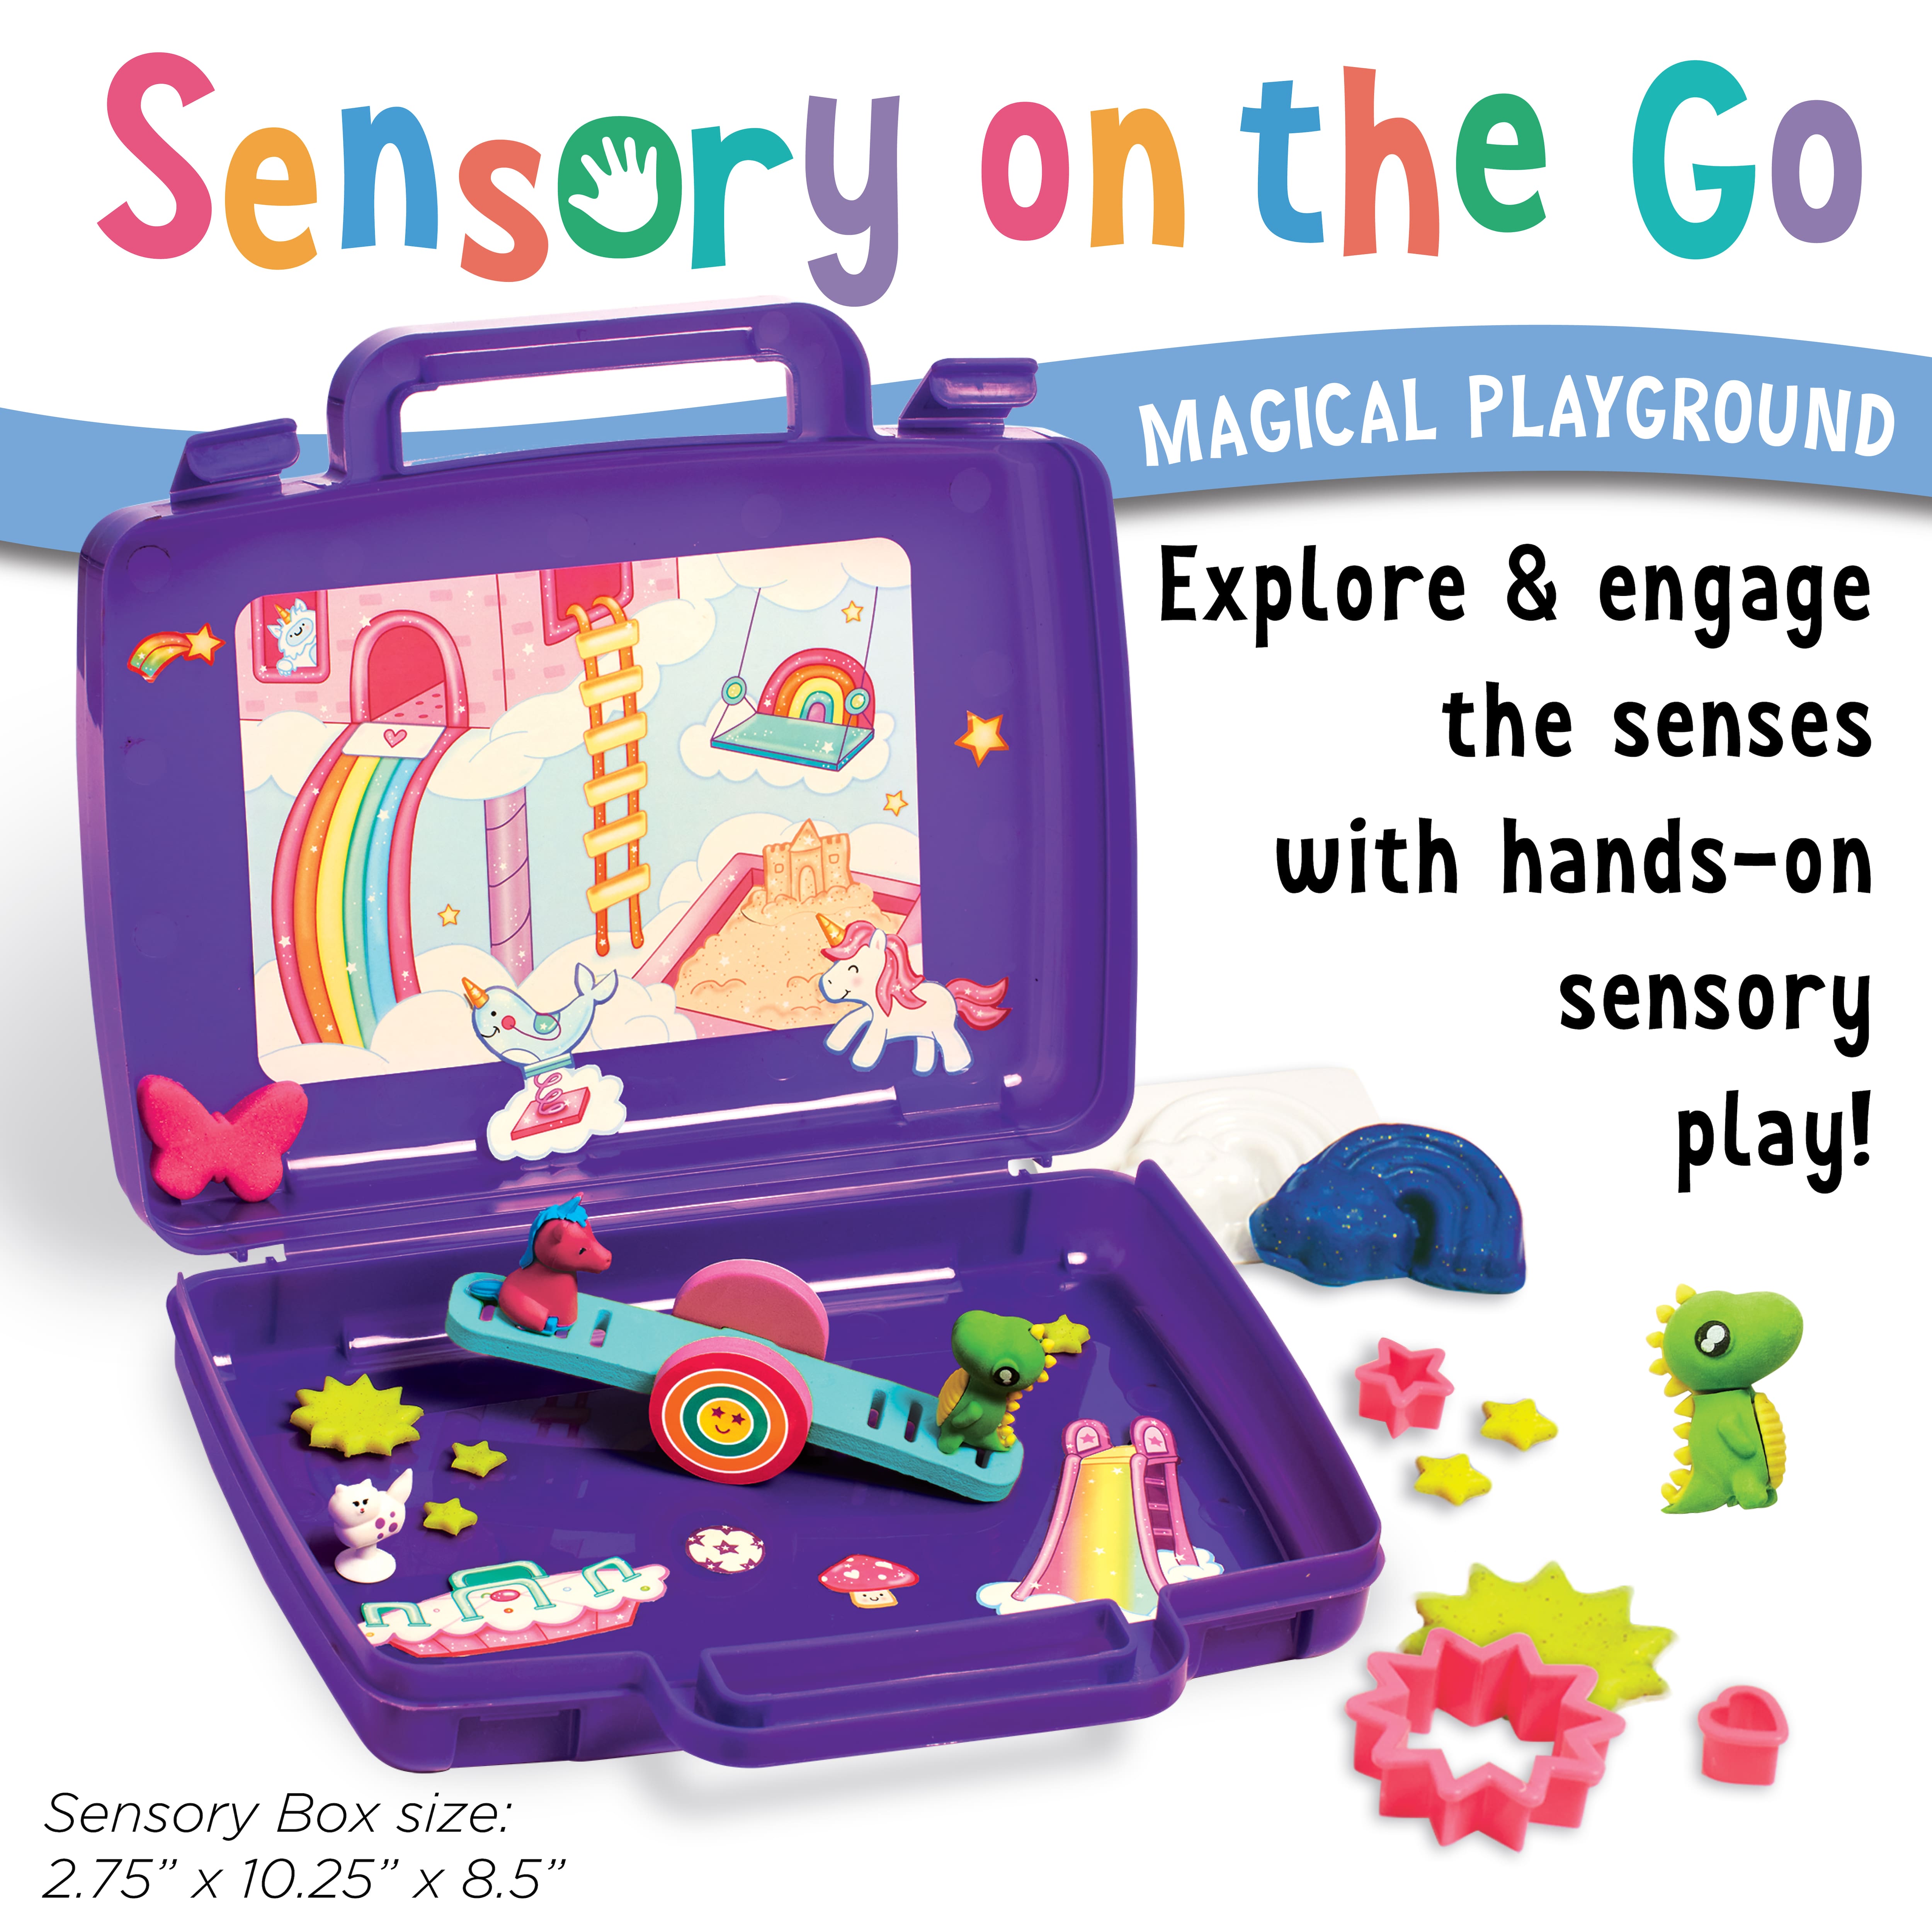 Wholesale vanGogh On-the-Go Kids Travel Art Play Set for your store